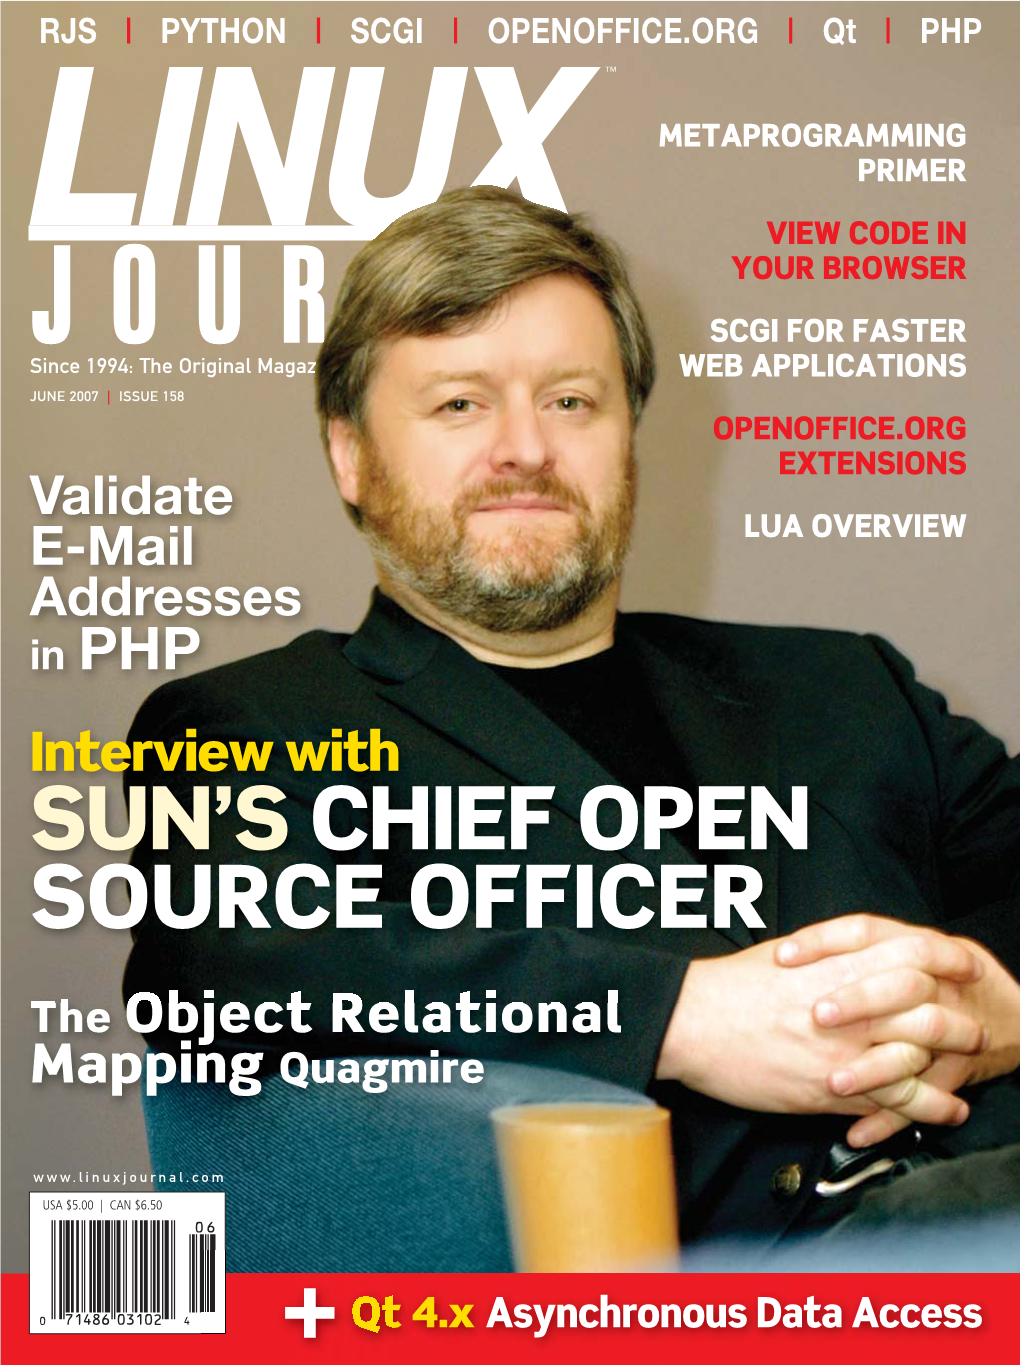 Sun's Chief Open Source Officer +